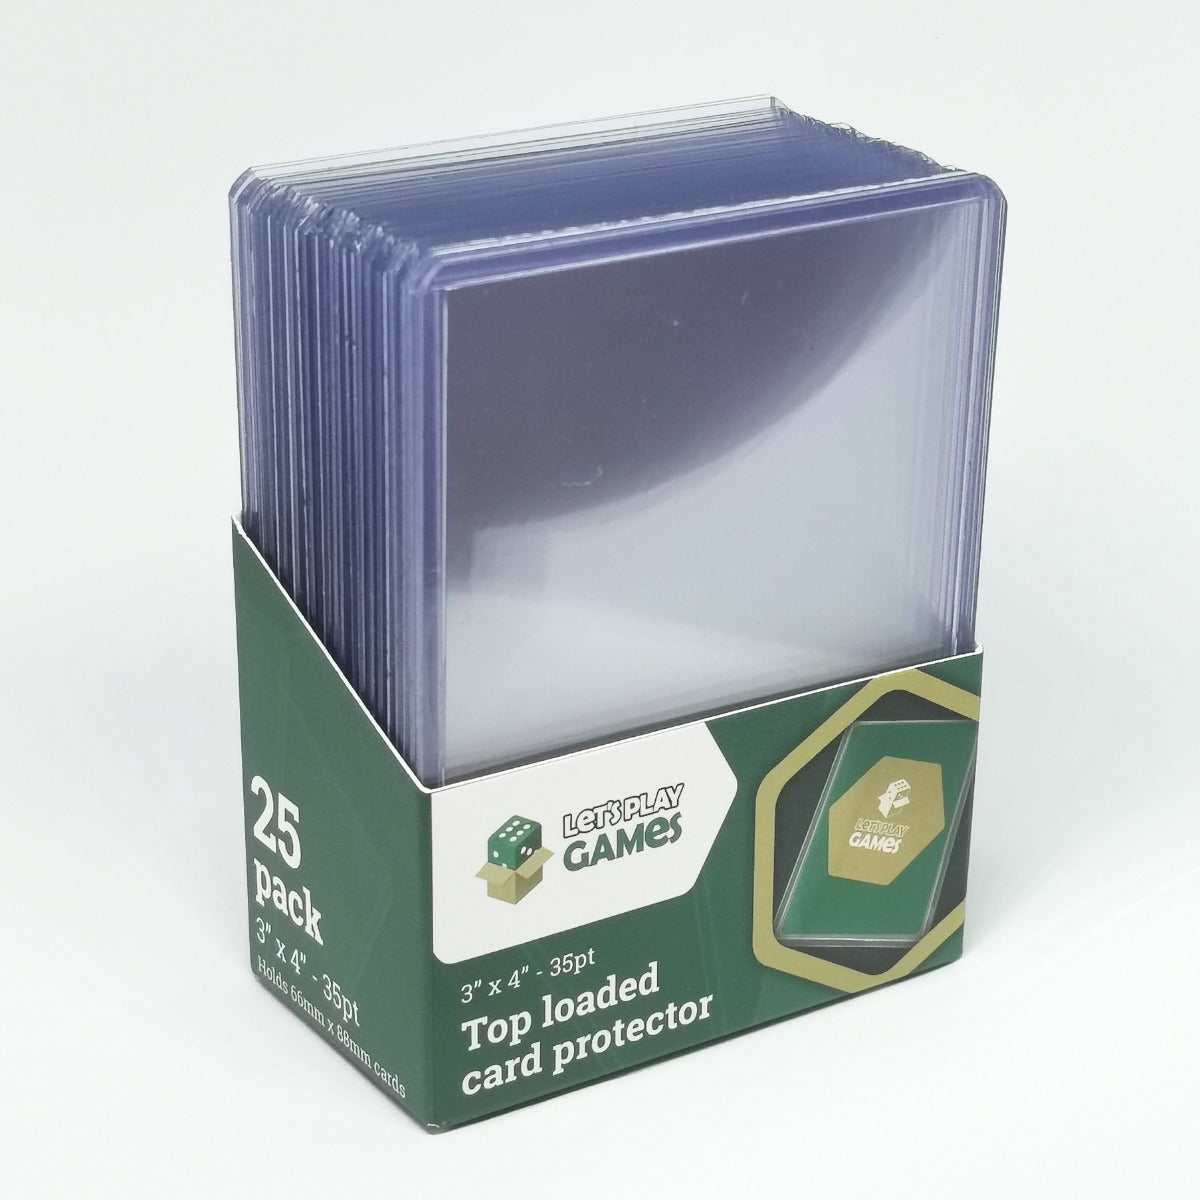 Top Loaded Card Protector 3"x4" 35pt (25)